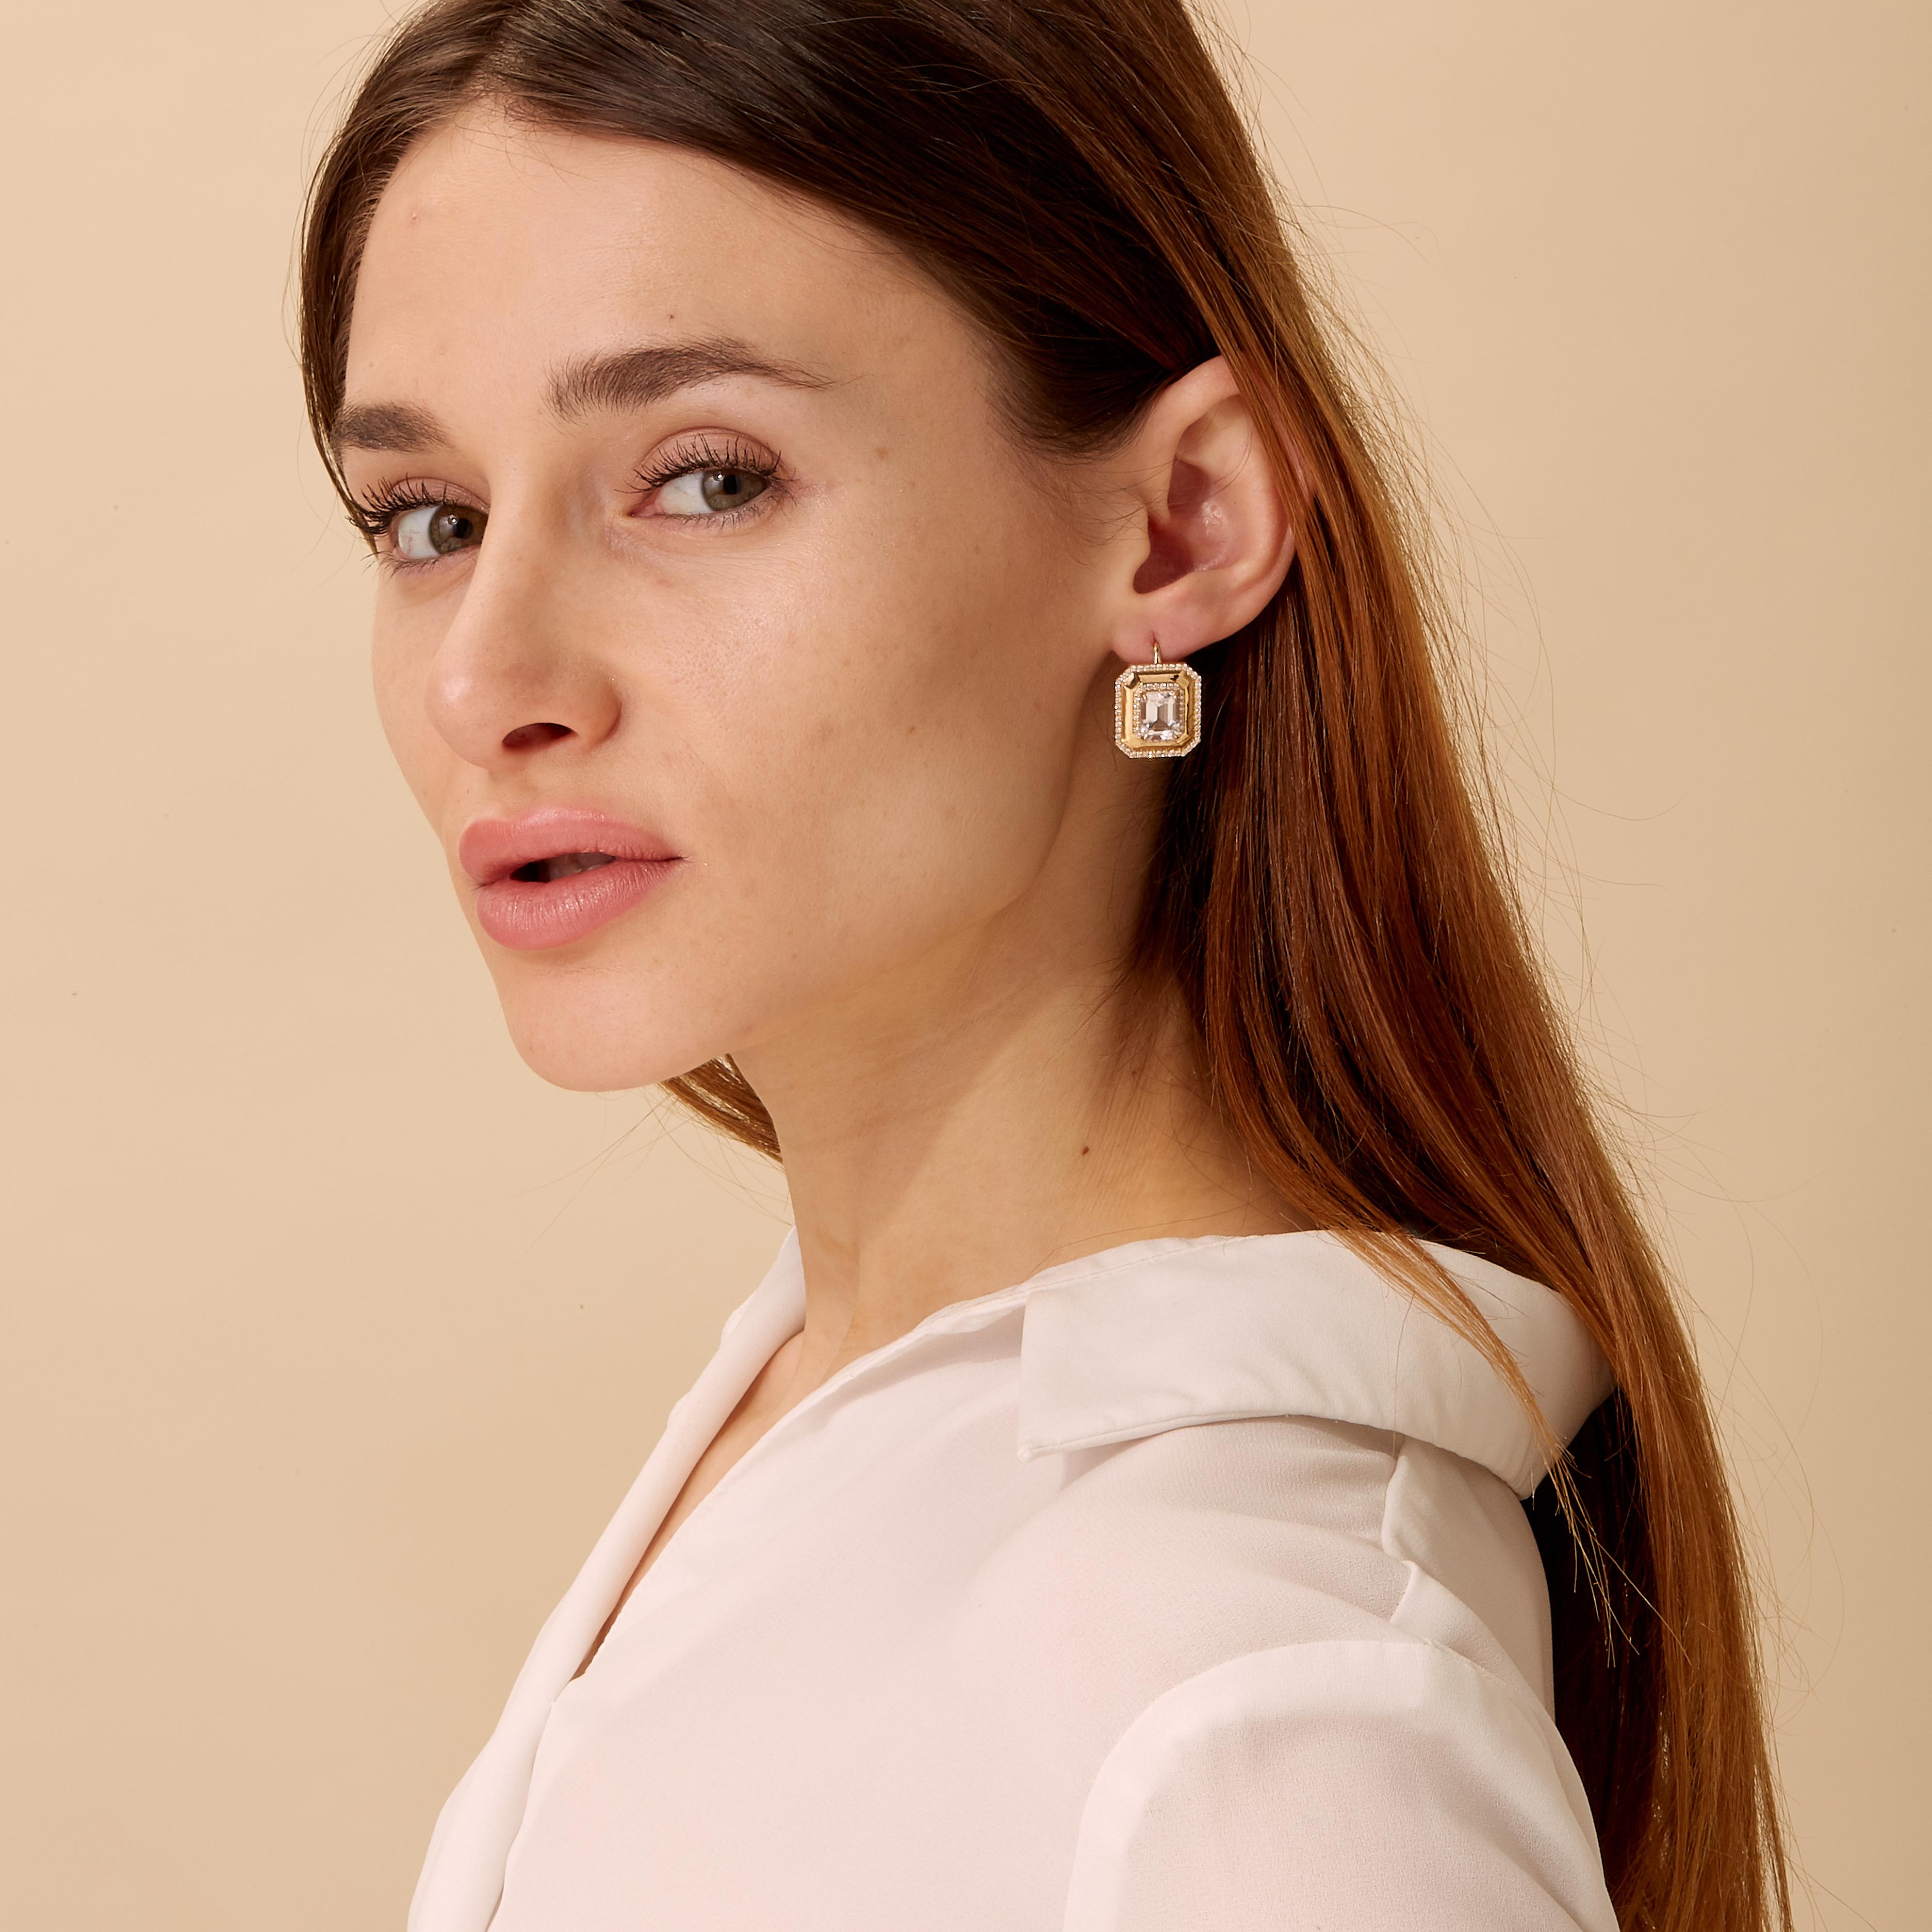 Created in 18 karat yellow gold
Rock crystal 4 carats approx.
Diamonds 0.75 carat approx.
French wire for pierced ears
Limited Edition

Meticulously crafted from 18 karat yellow gold, these sophisticated earrings feature a center of glittering rock